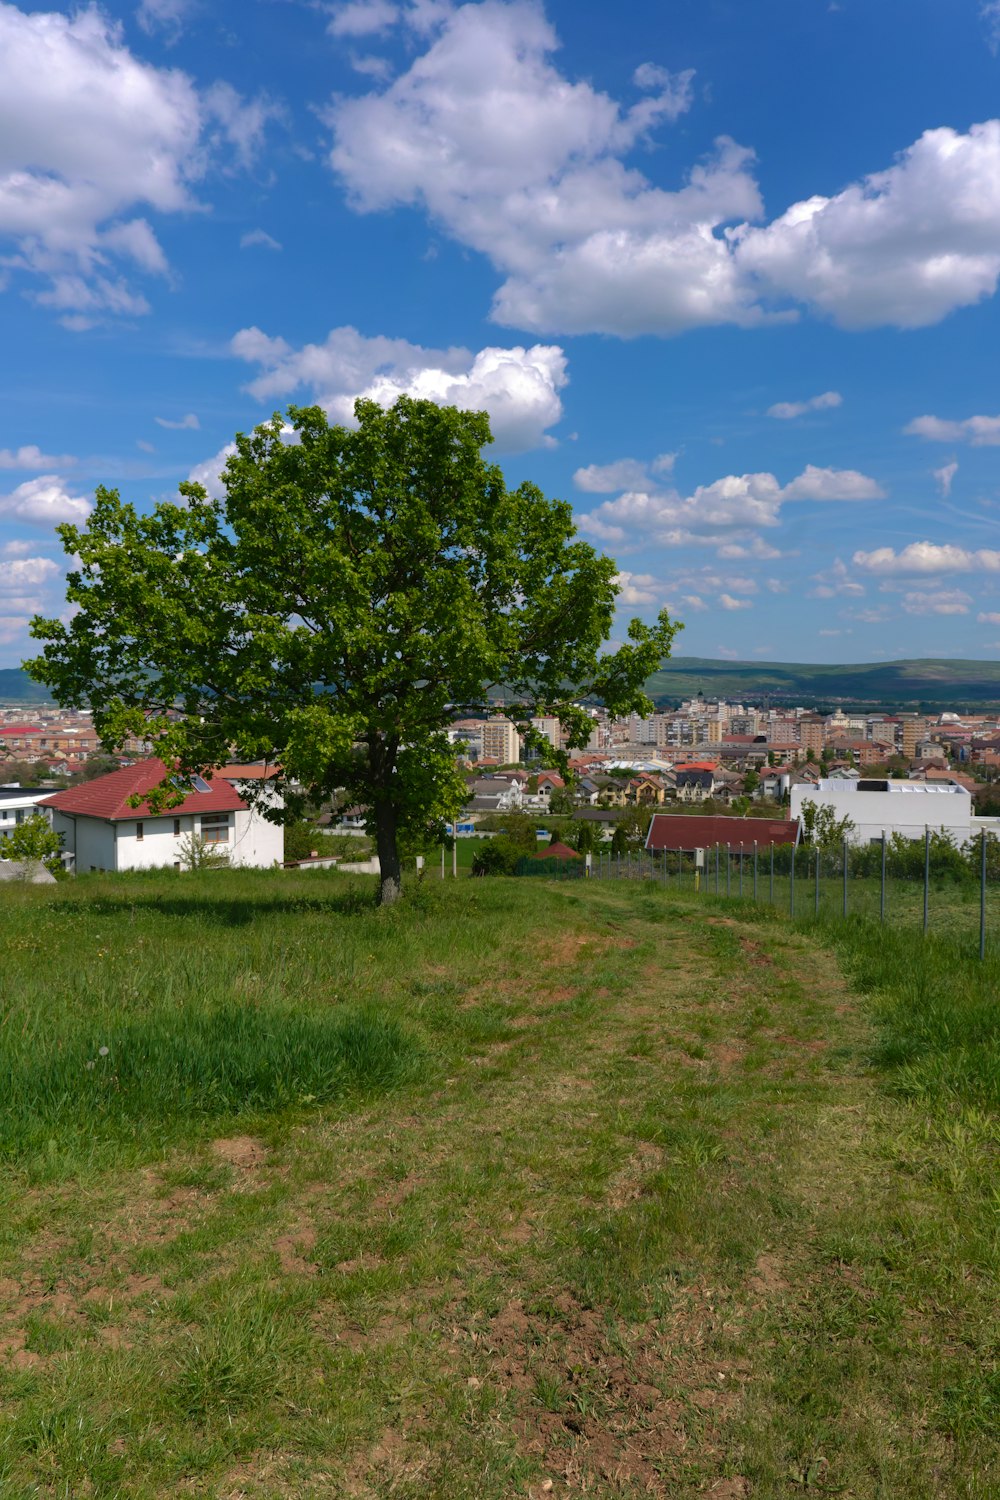 a lone tree in a grassy field with a city in the background